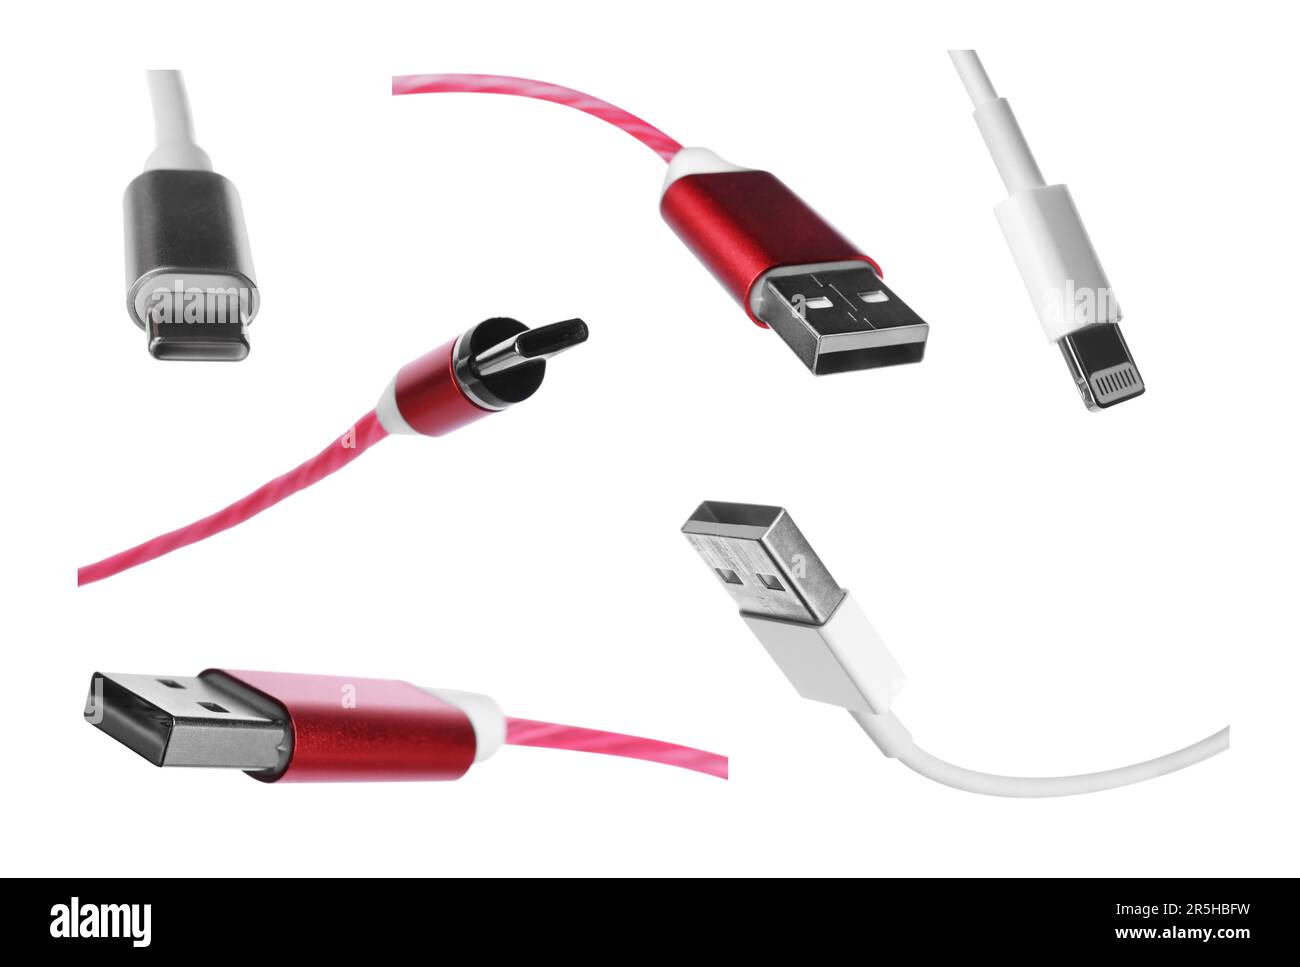 Collage of cables with USB, type C and lightning connectors on white background Stock Photo